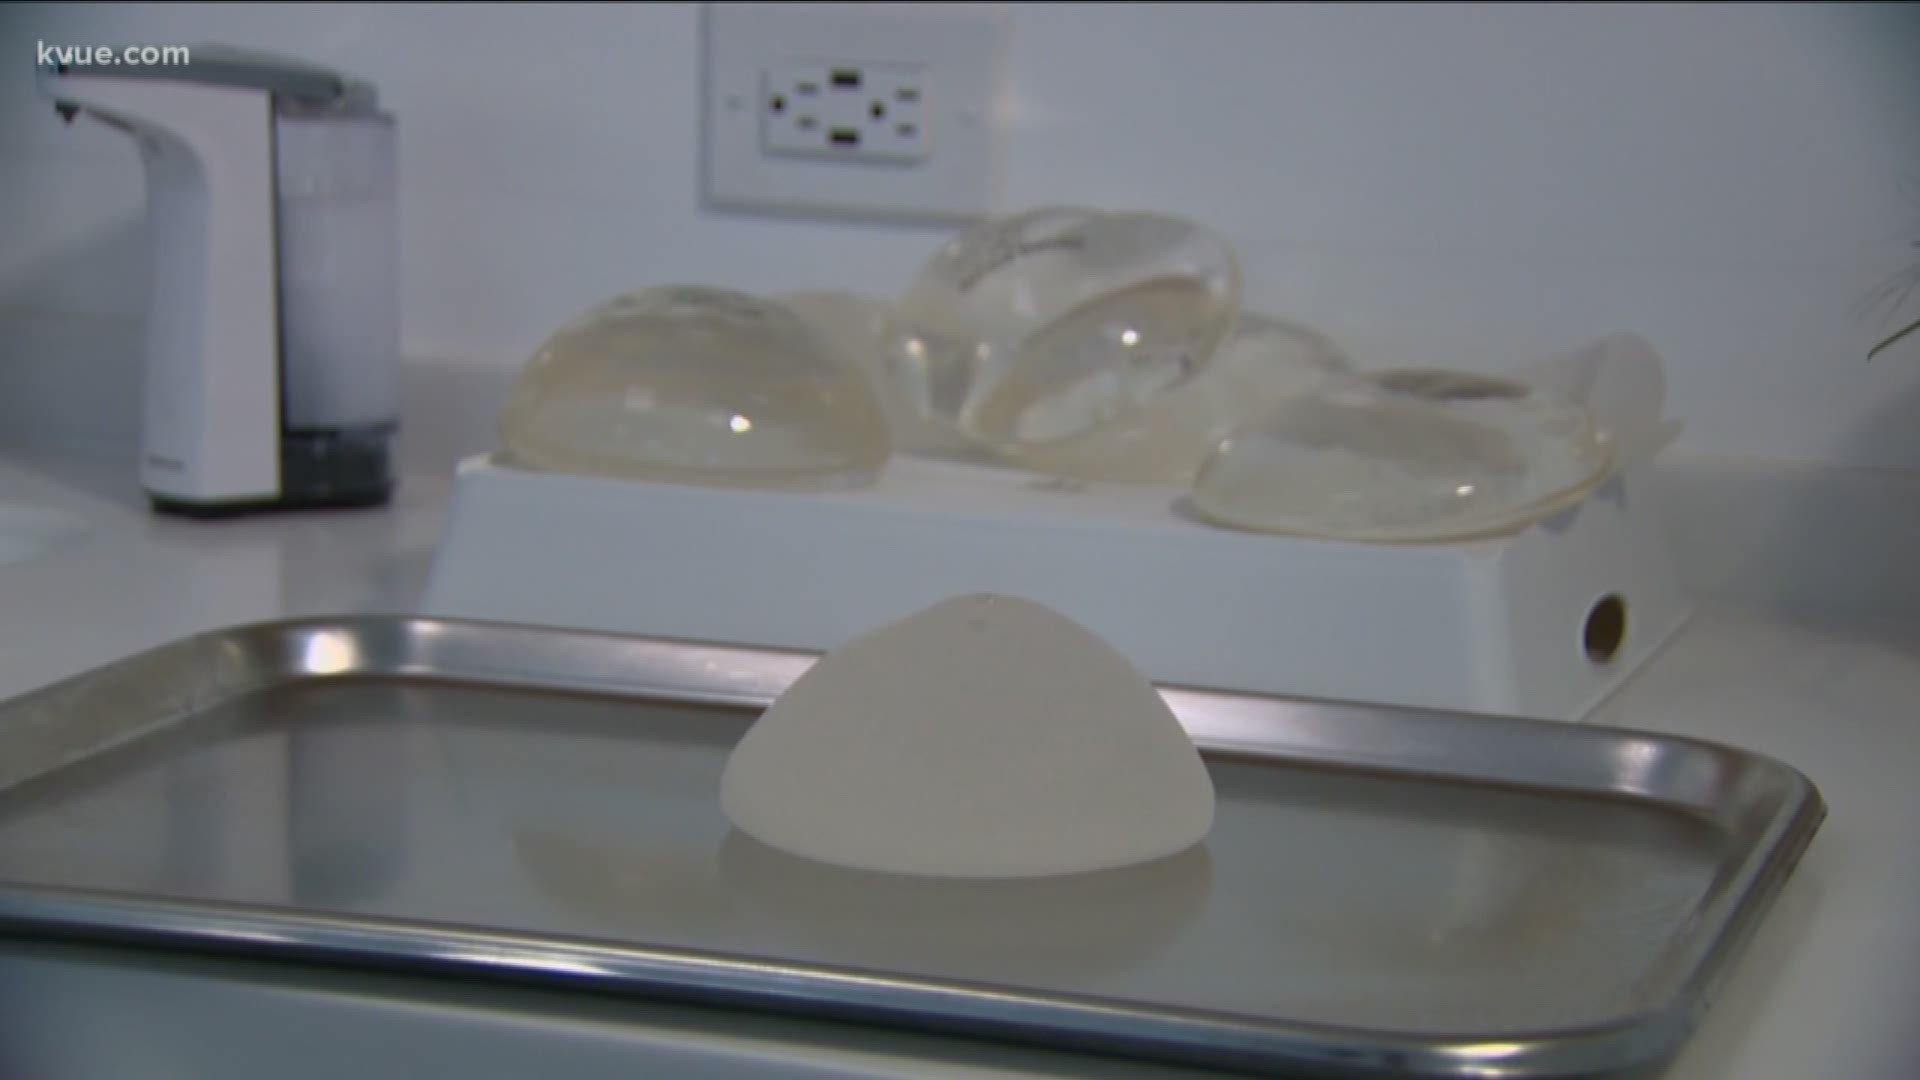 The KVUE Defenders discovered the FDA found the implants are linked to increased risk of developing lymphoma.